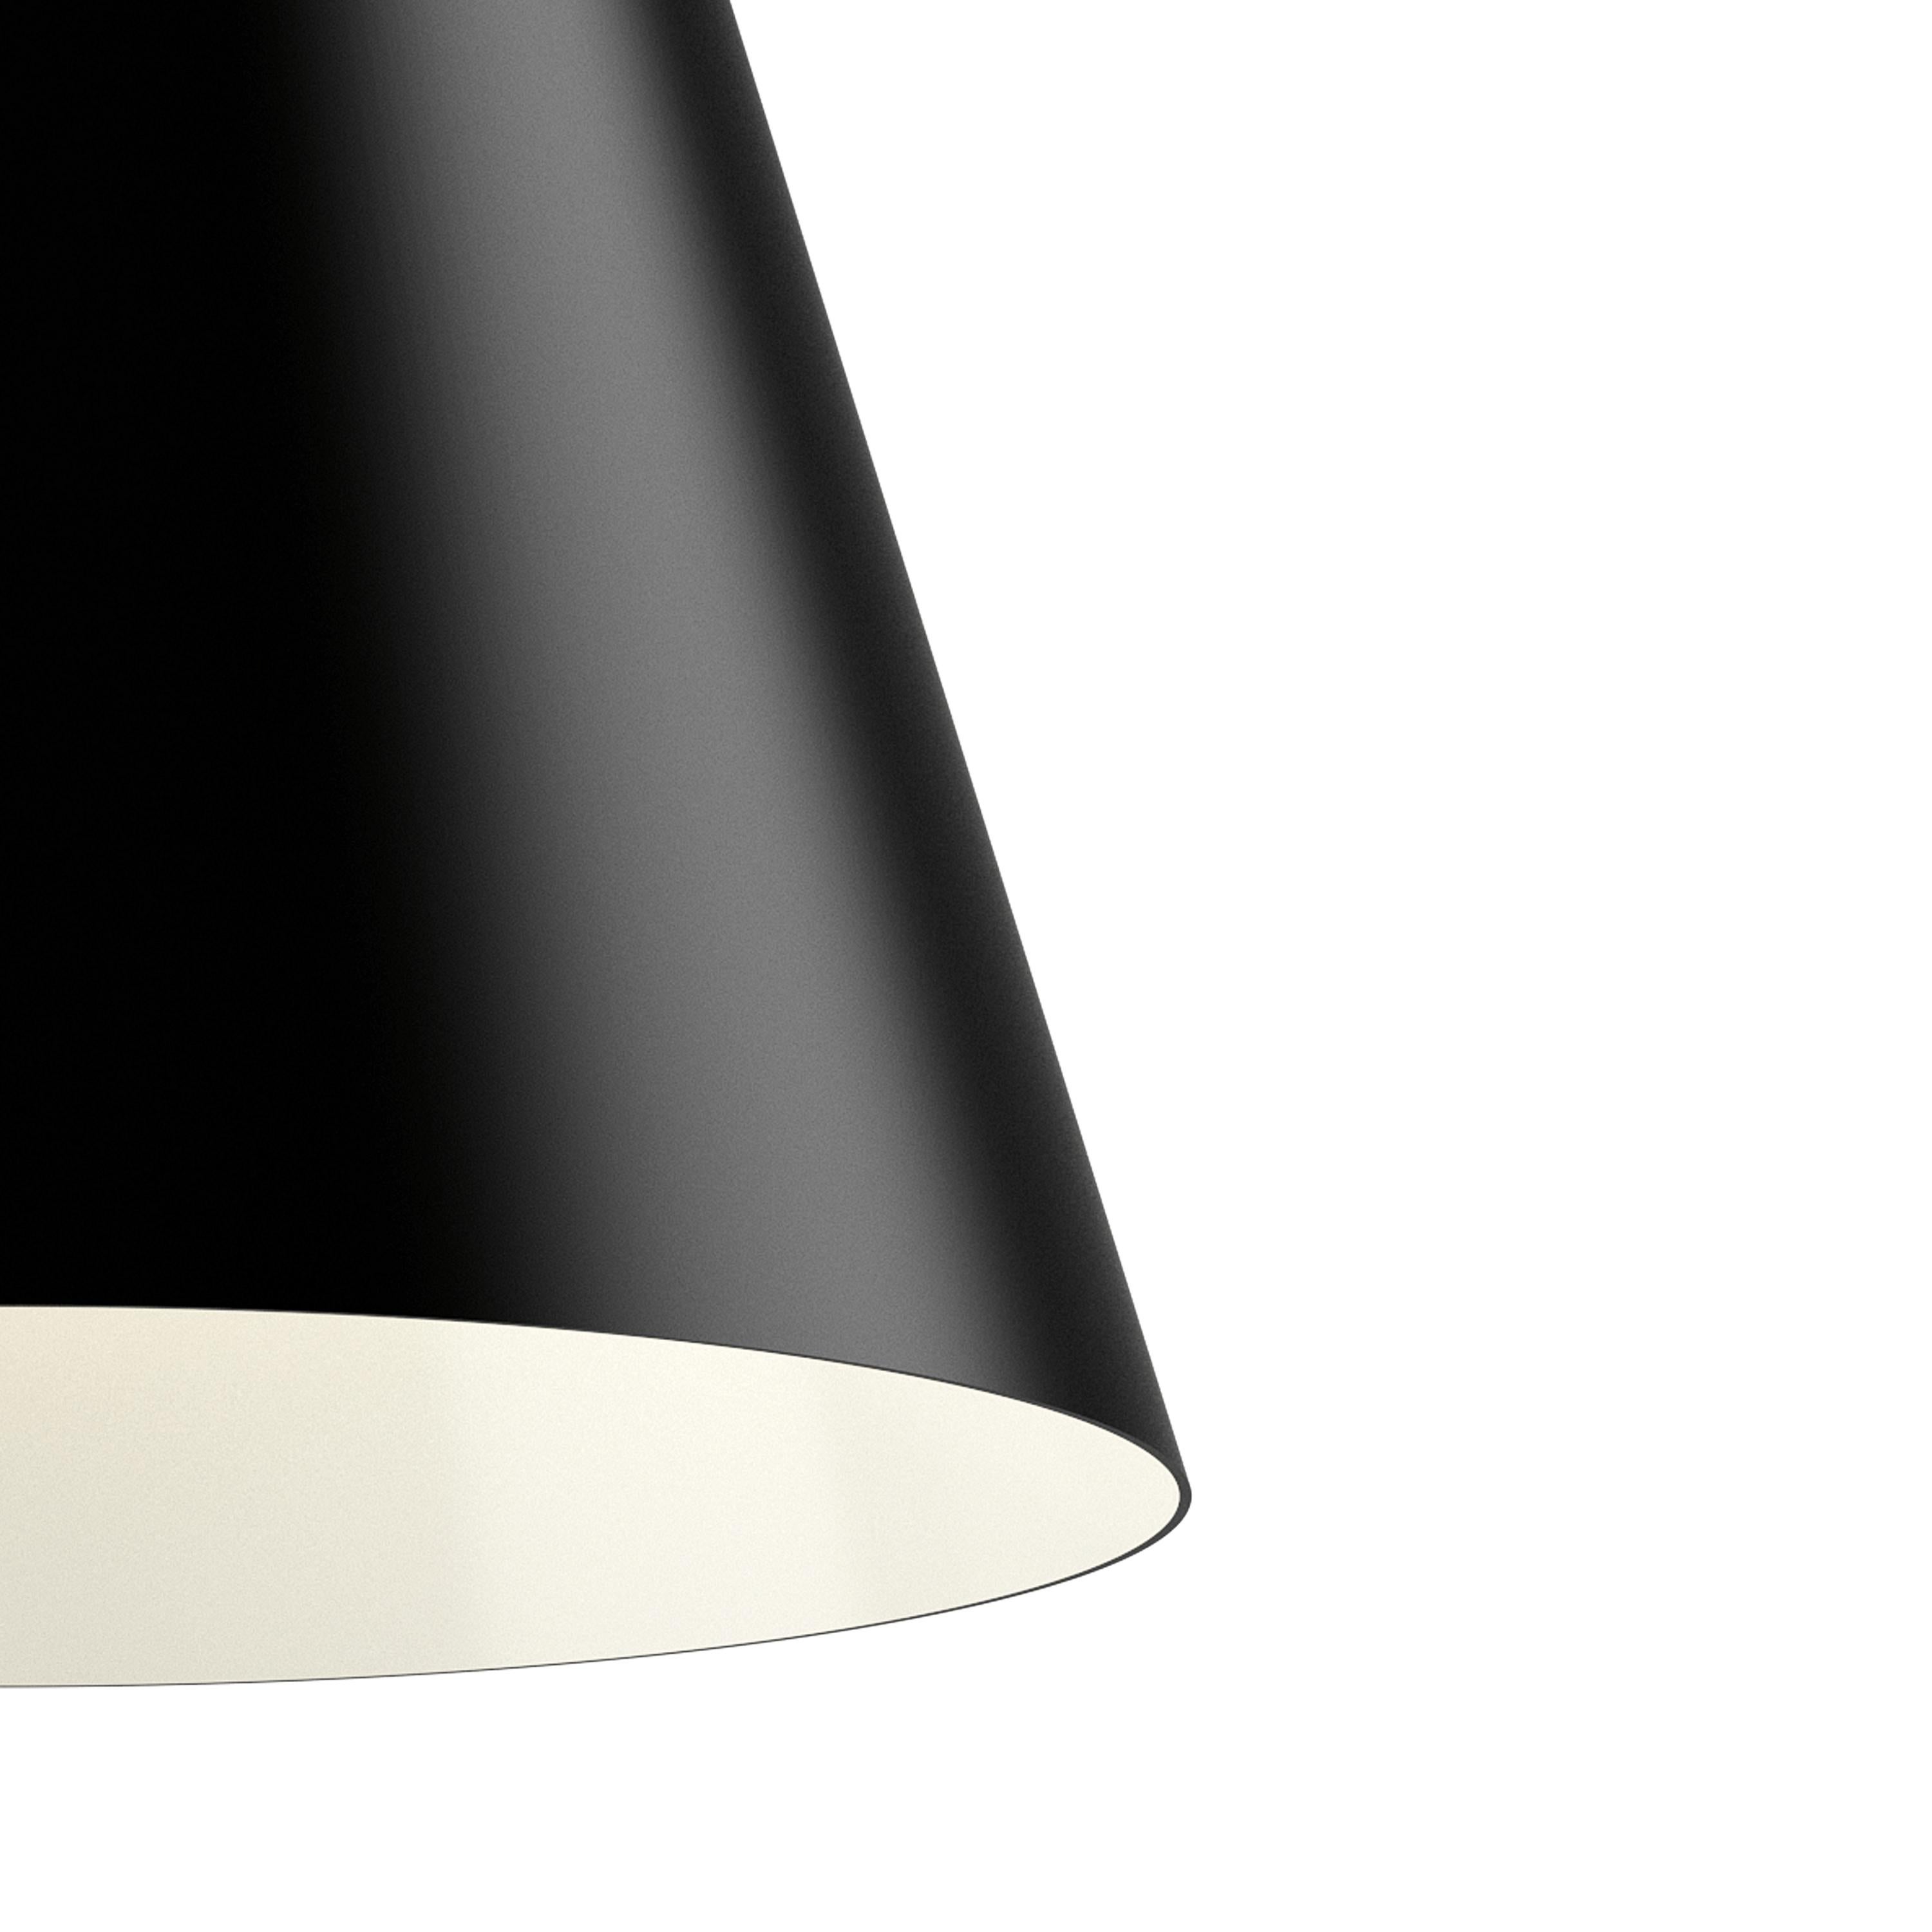 Extra Large 'Above 21.7' Pendant Lamp for Louis Poulsen in Black 5